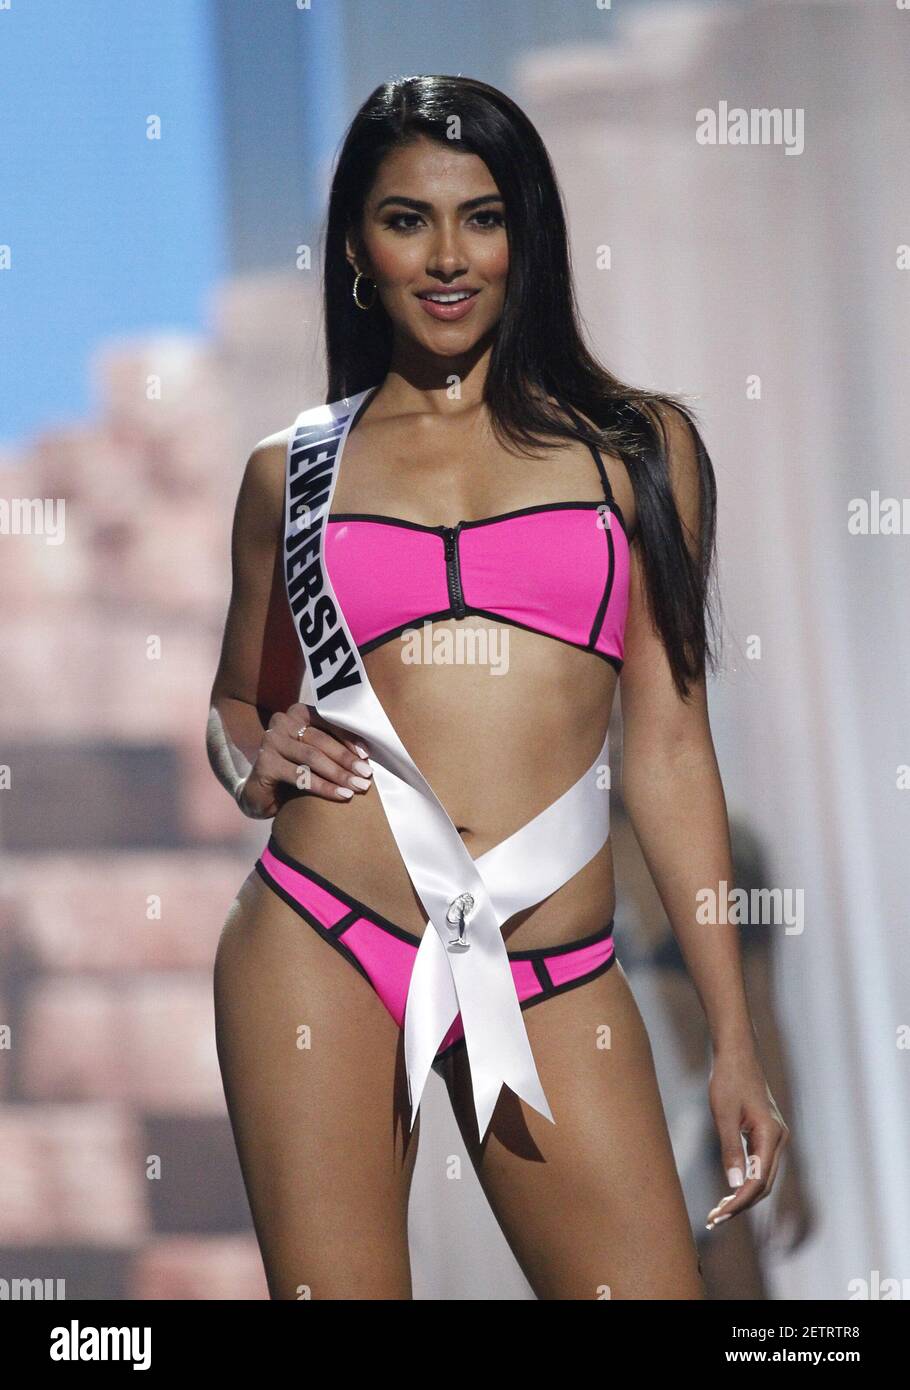 Miss New Jersey USA, Chhavi Verg during the 2017 Miss USA Preliminary  Competition, Mandalay Bay Events